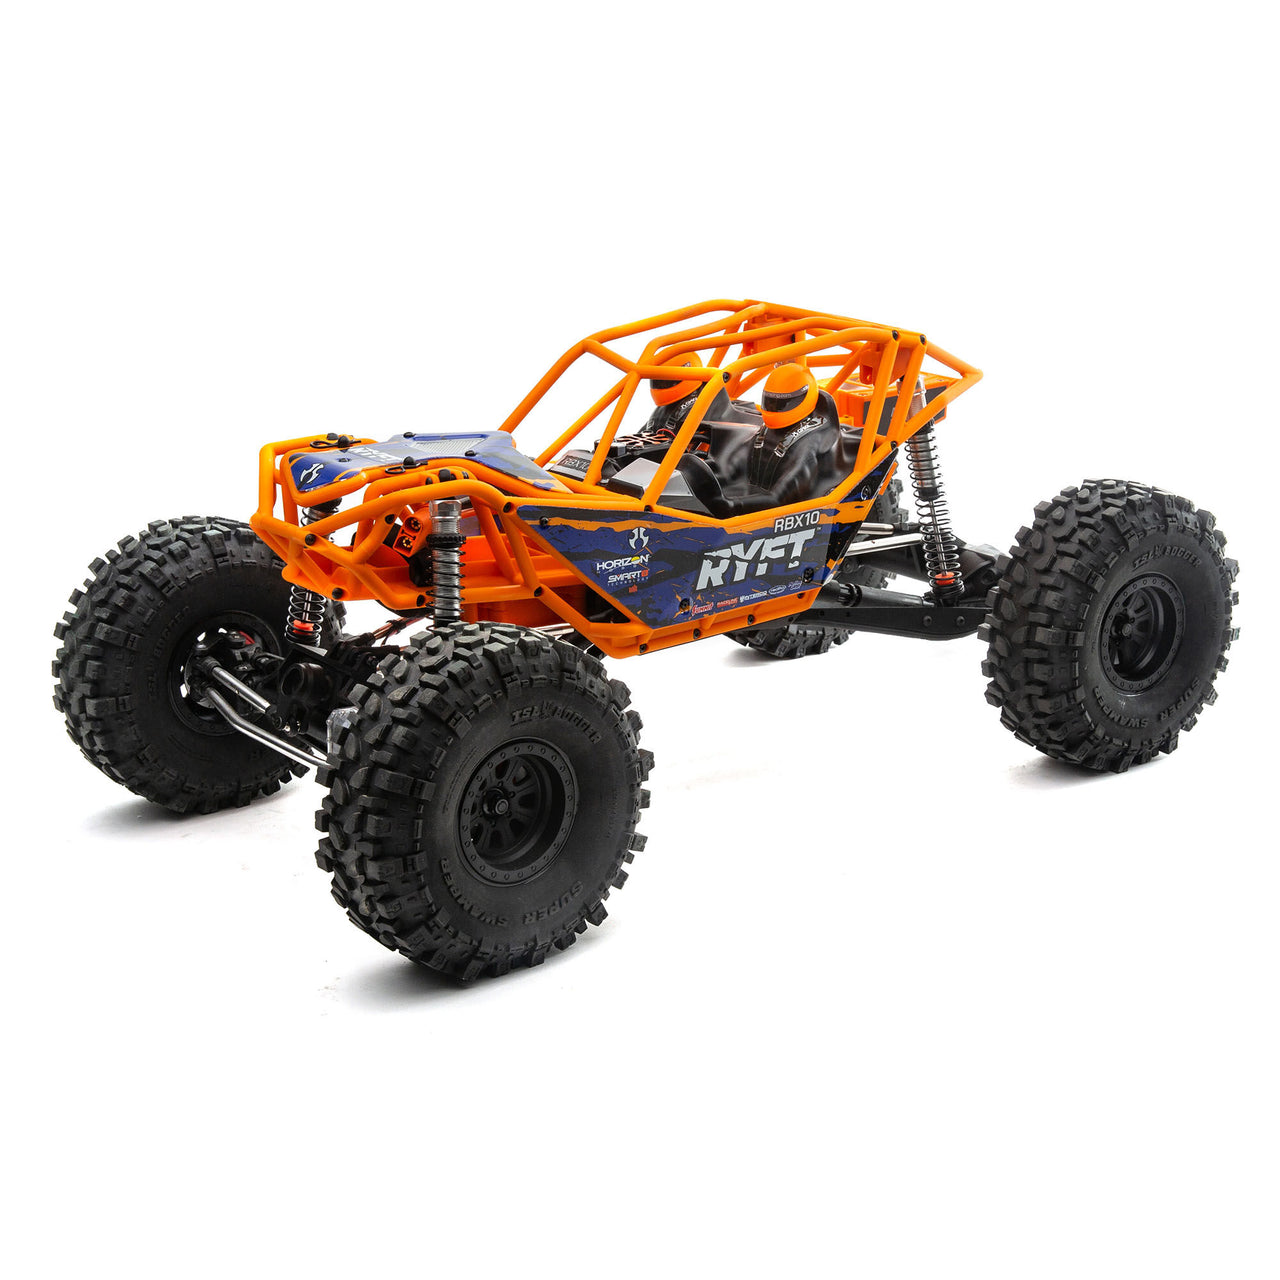 AXI03005T1 AXIAL RBX10 RYFT RTR Orange